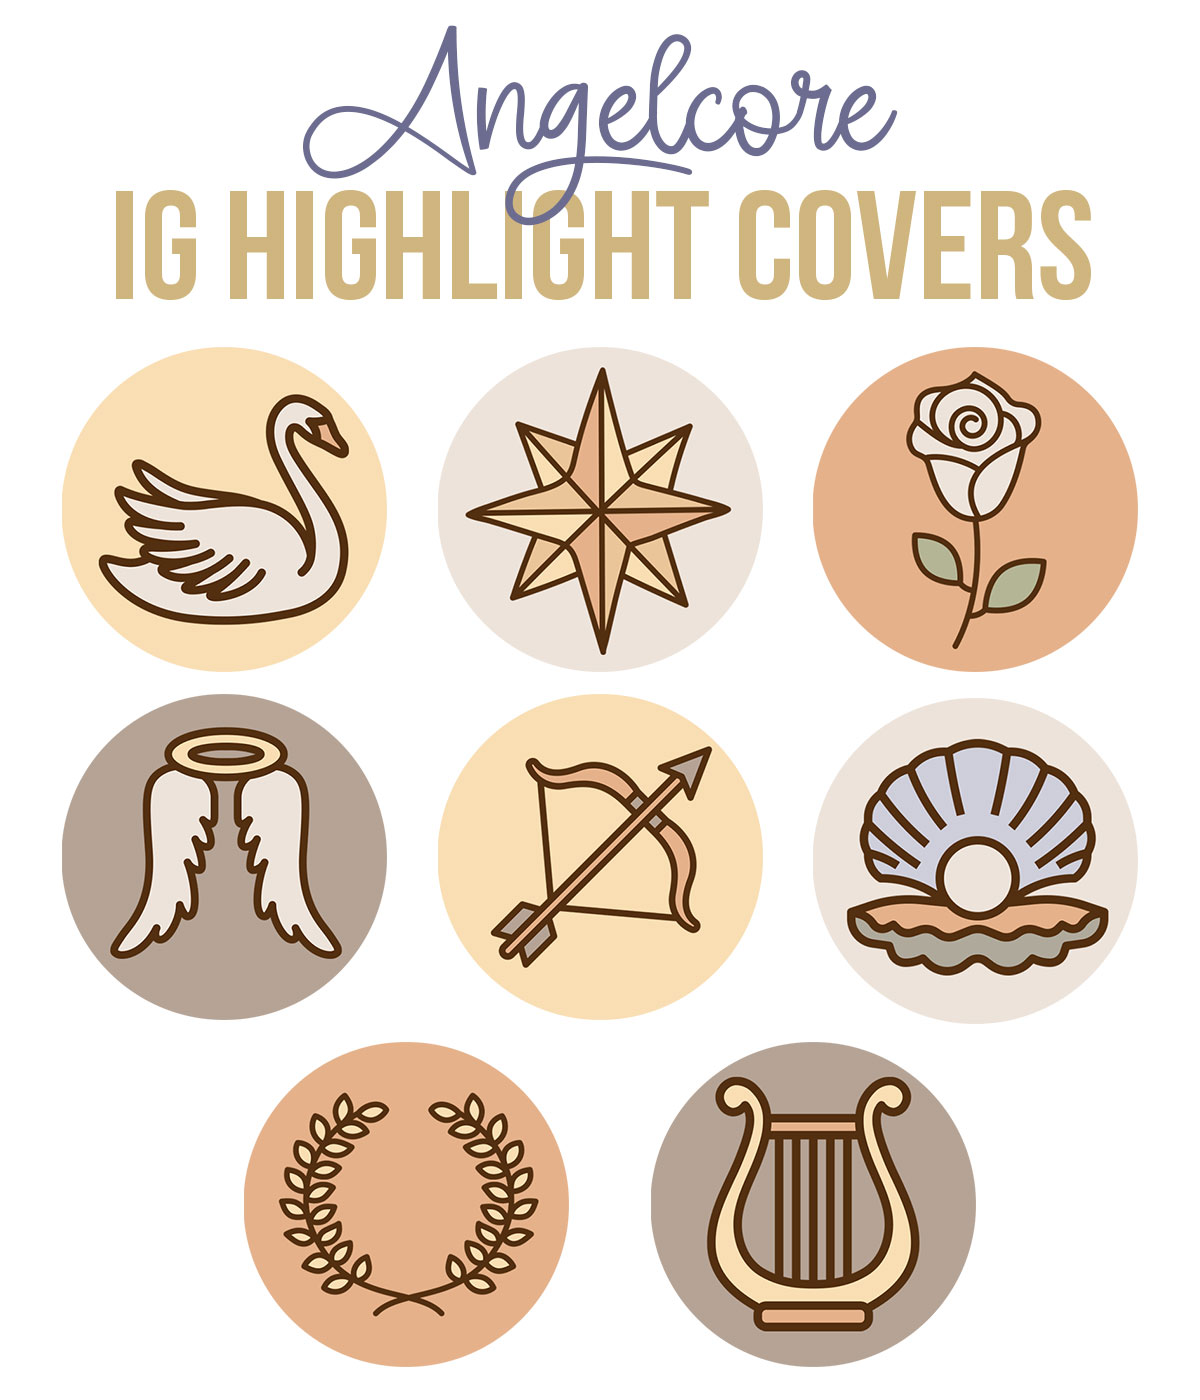 angelcore ig highlight covers pack